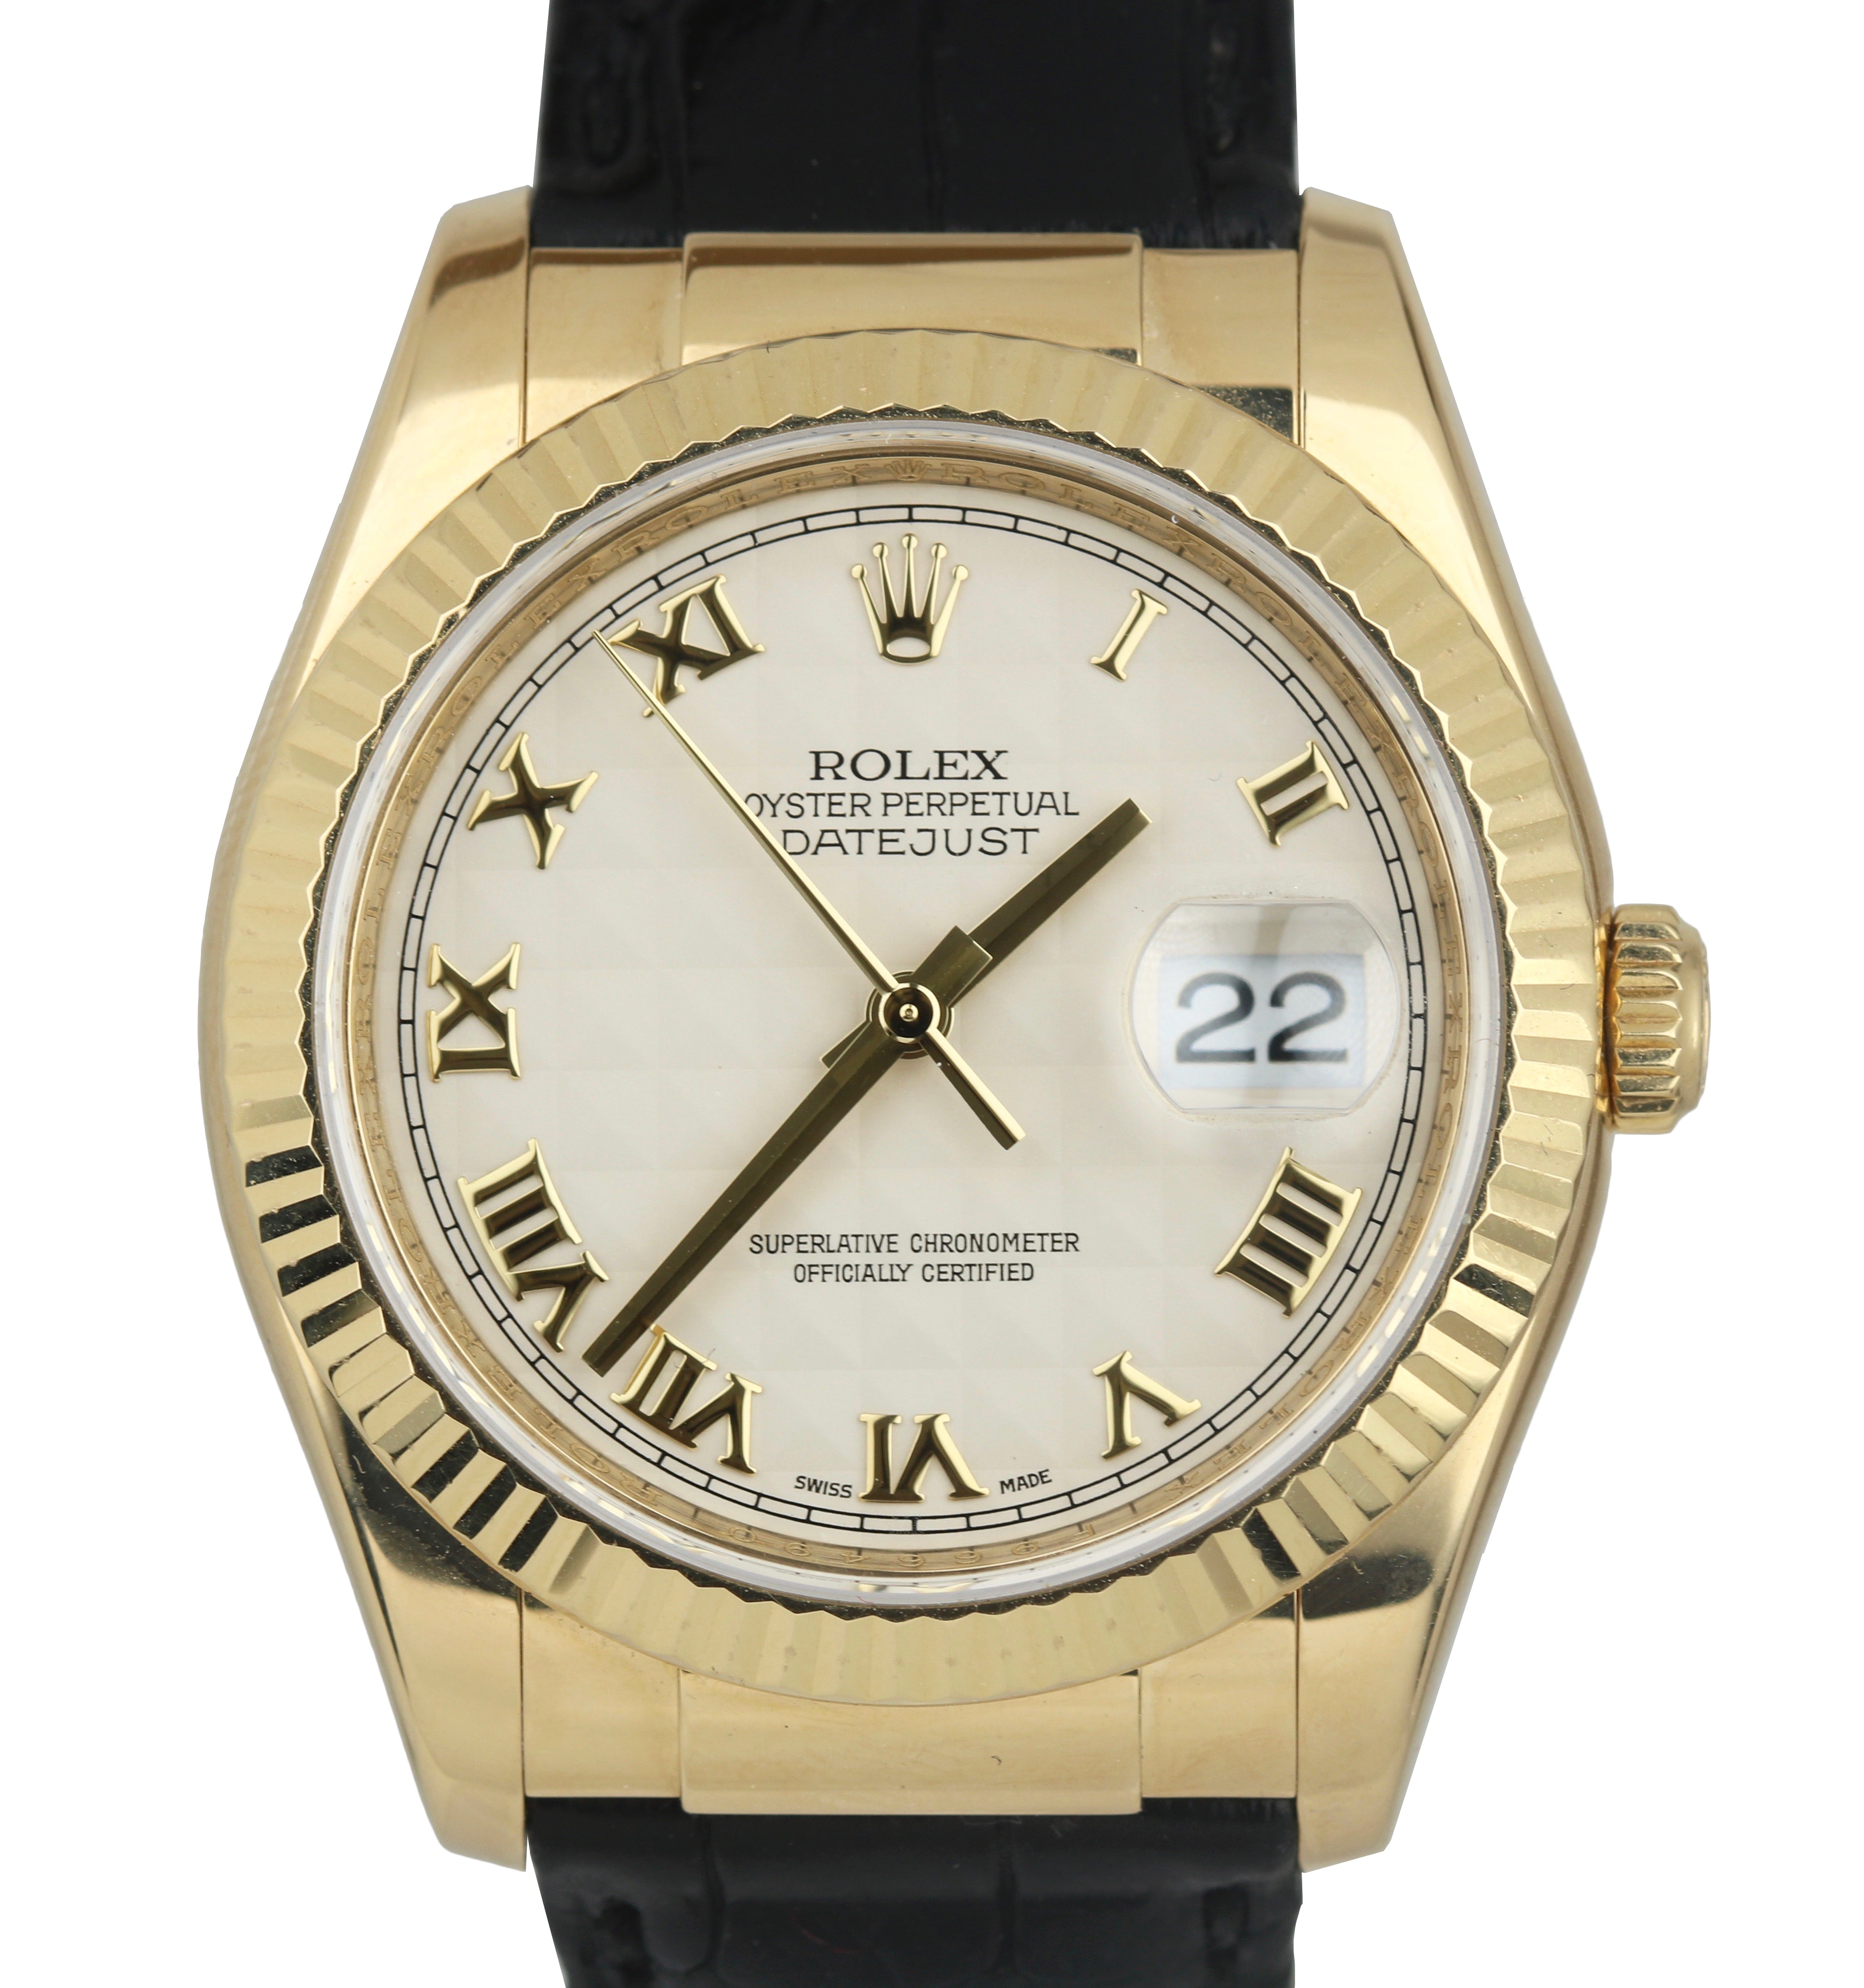 MINT Rolex DateJust 36mm 116138 Ivory Pyramid Dial 18K Yellow Gold Leather Watch